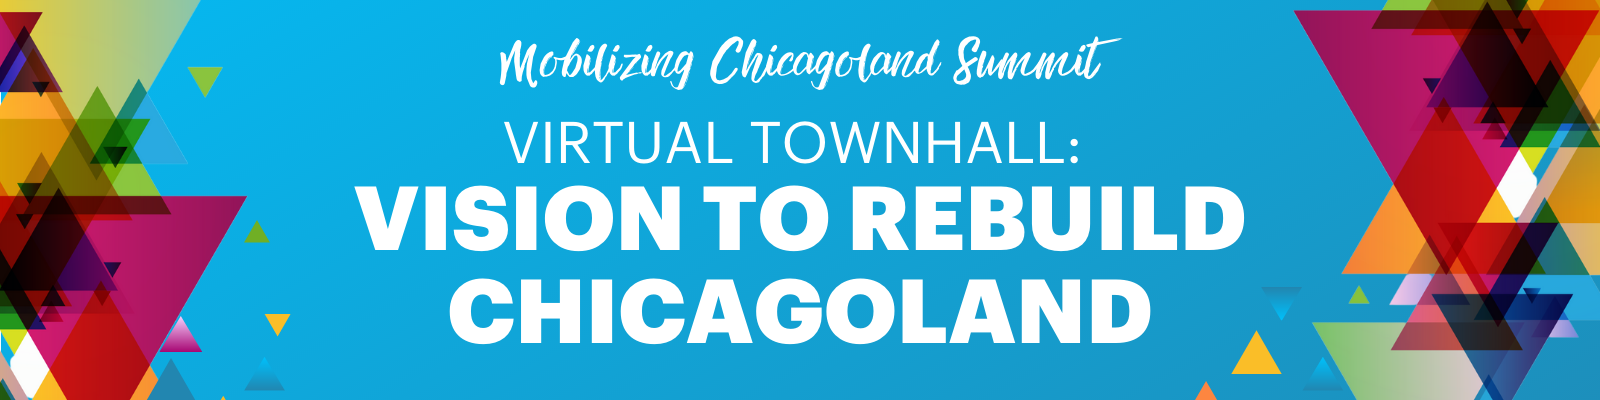 Vision to Rebuild Chicagoland: Virtual Townhall